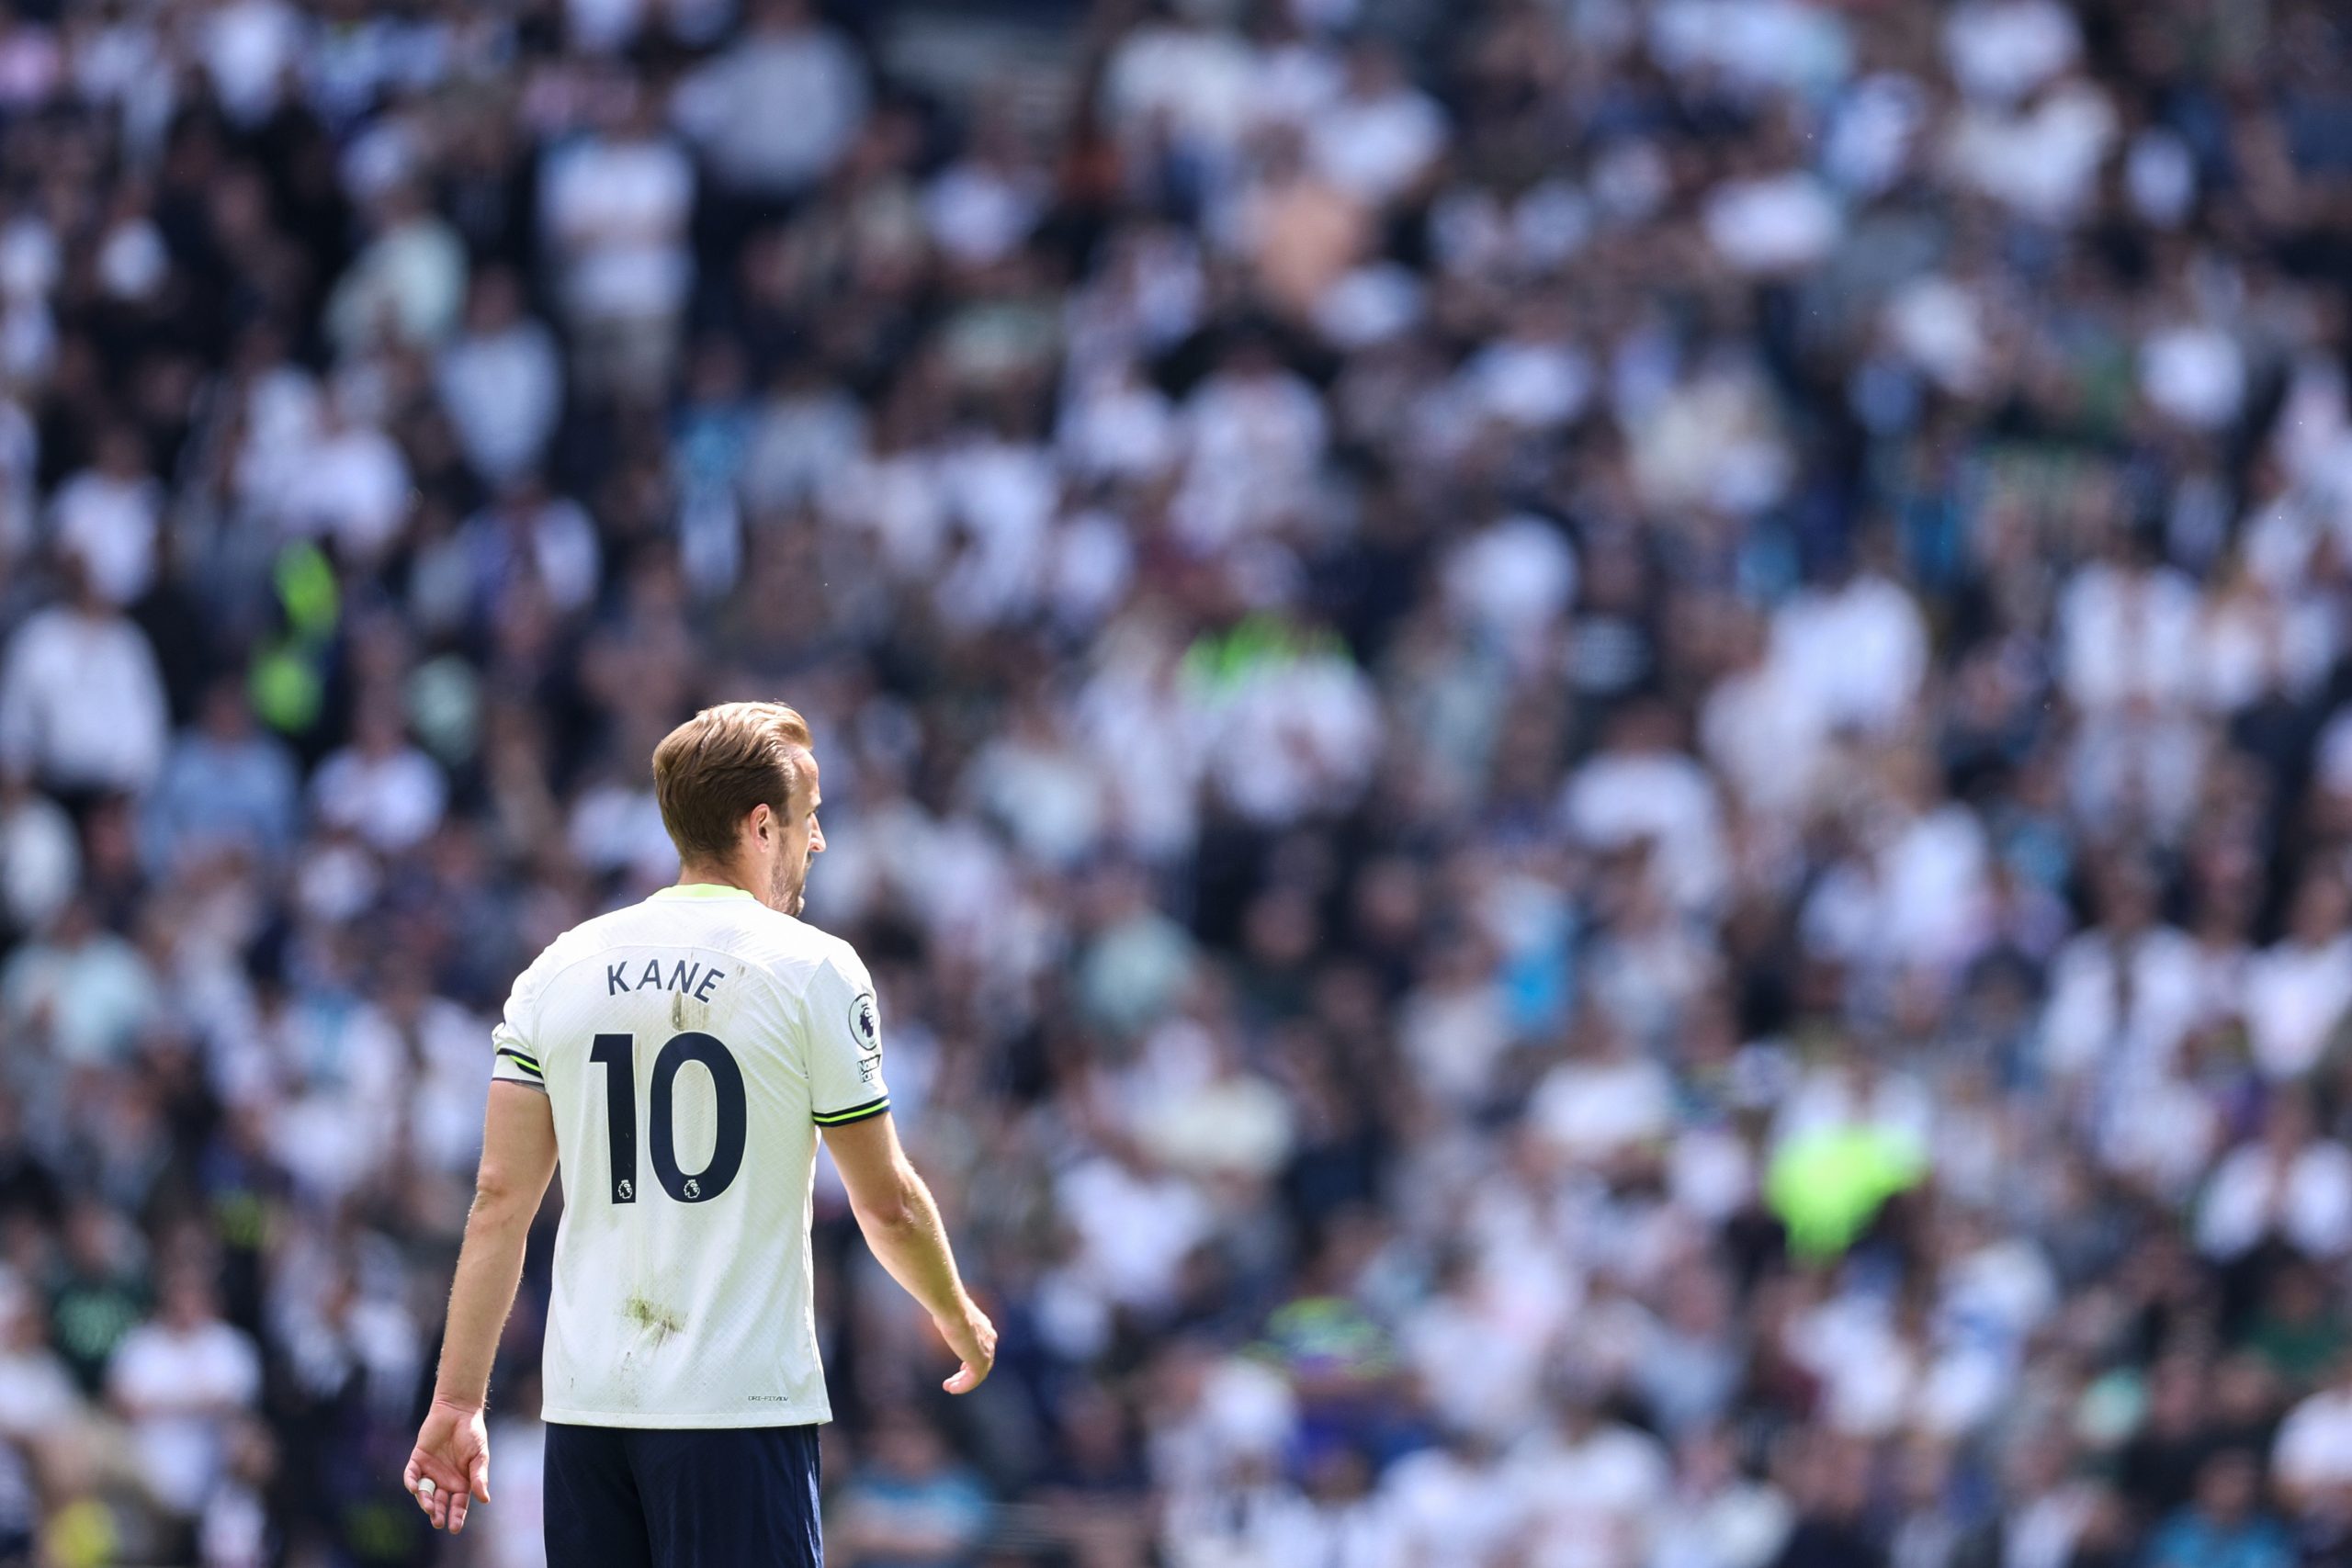 Tottenham Hotspur have placed a £100 million price tag on Harry Kane.